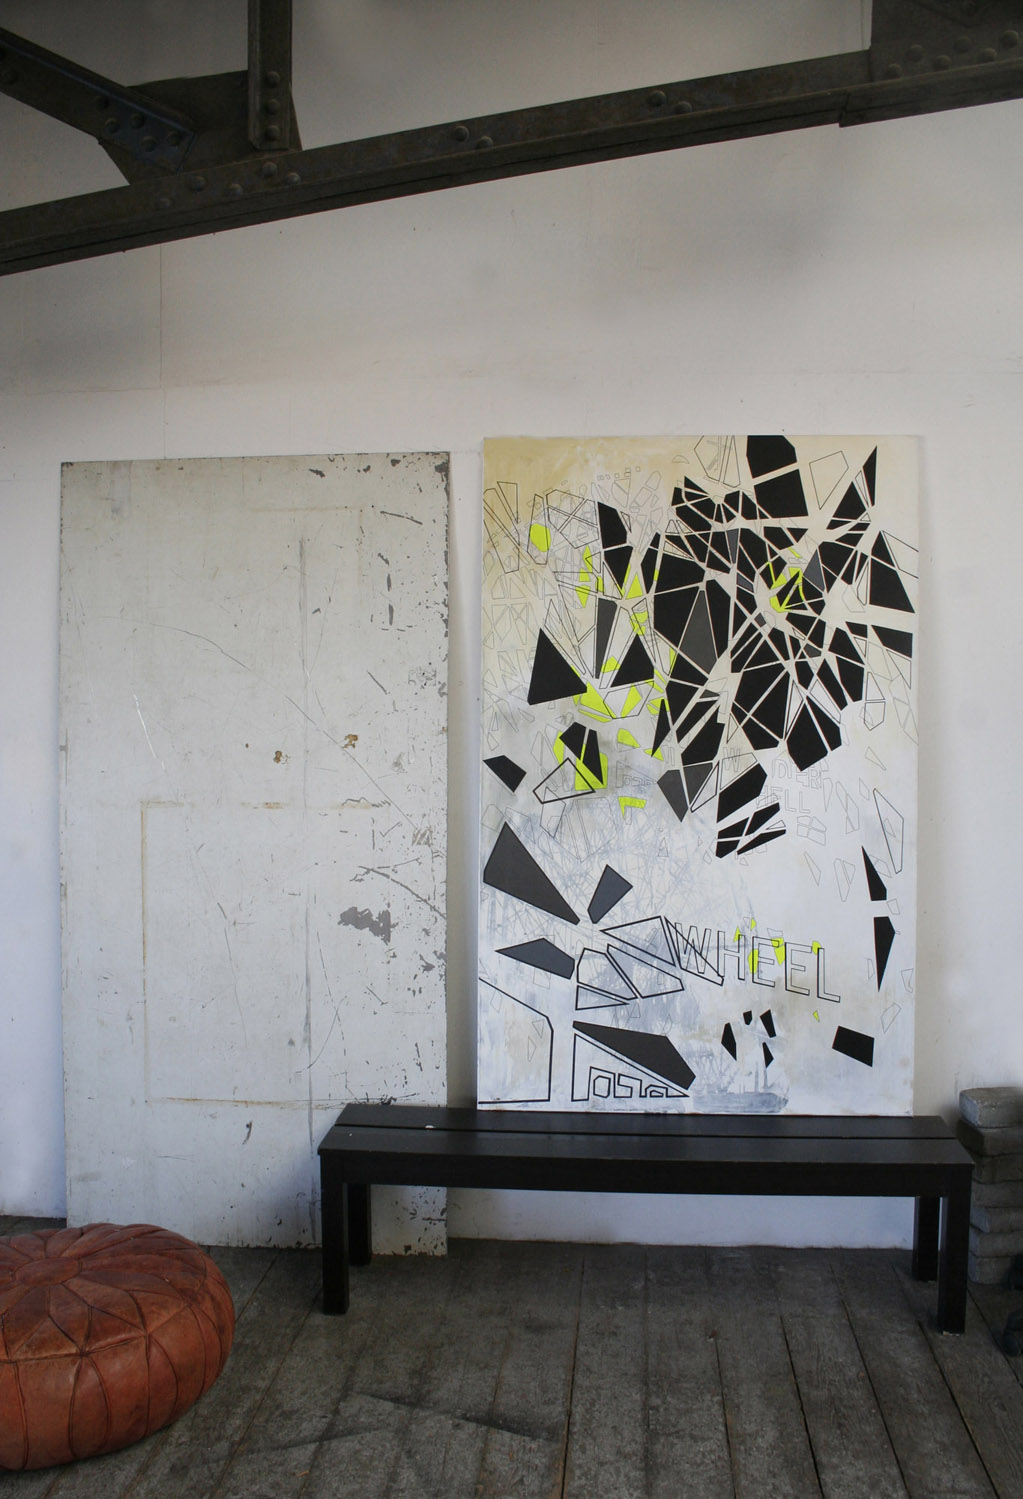 paintings, collages, abstract, geometric, graphical, pop, architecture, movement, patterns, science, black, grey, white, yellow, acrylic, cotton-canvas, pencils, photographs, abstract-forms, architectural, buildings, contemporary-art, danish, decorative, design, farm, interior, interior-design, modern, modern-art, nordic, scandinavien, Buy original high quality art. Paintings, drawings, limited edition prints & posters by talented artists.